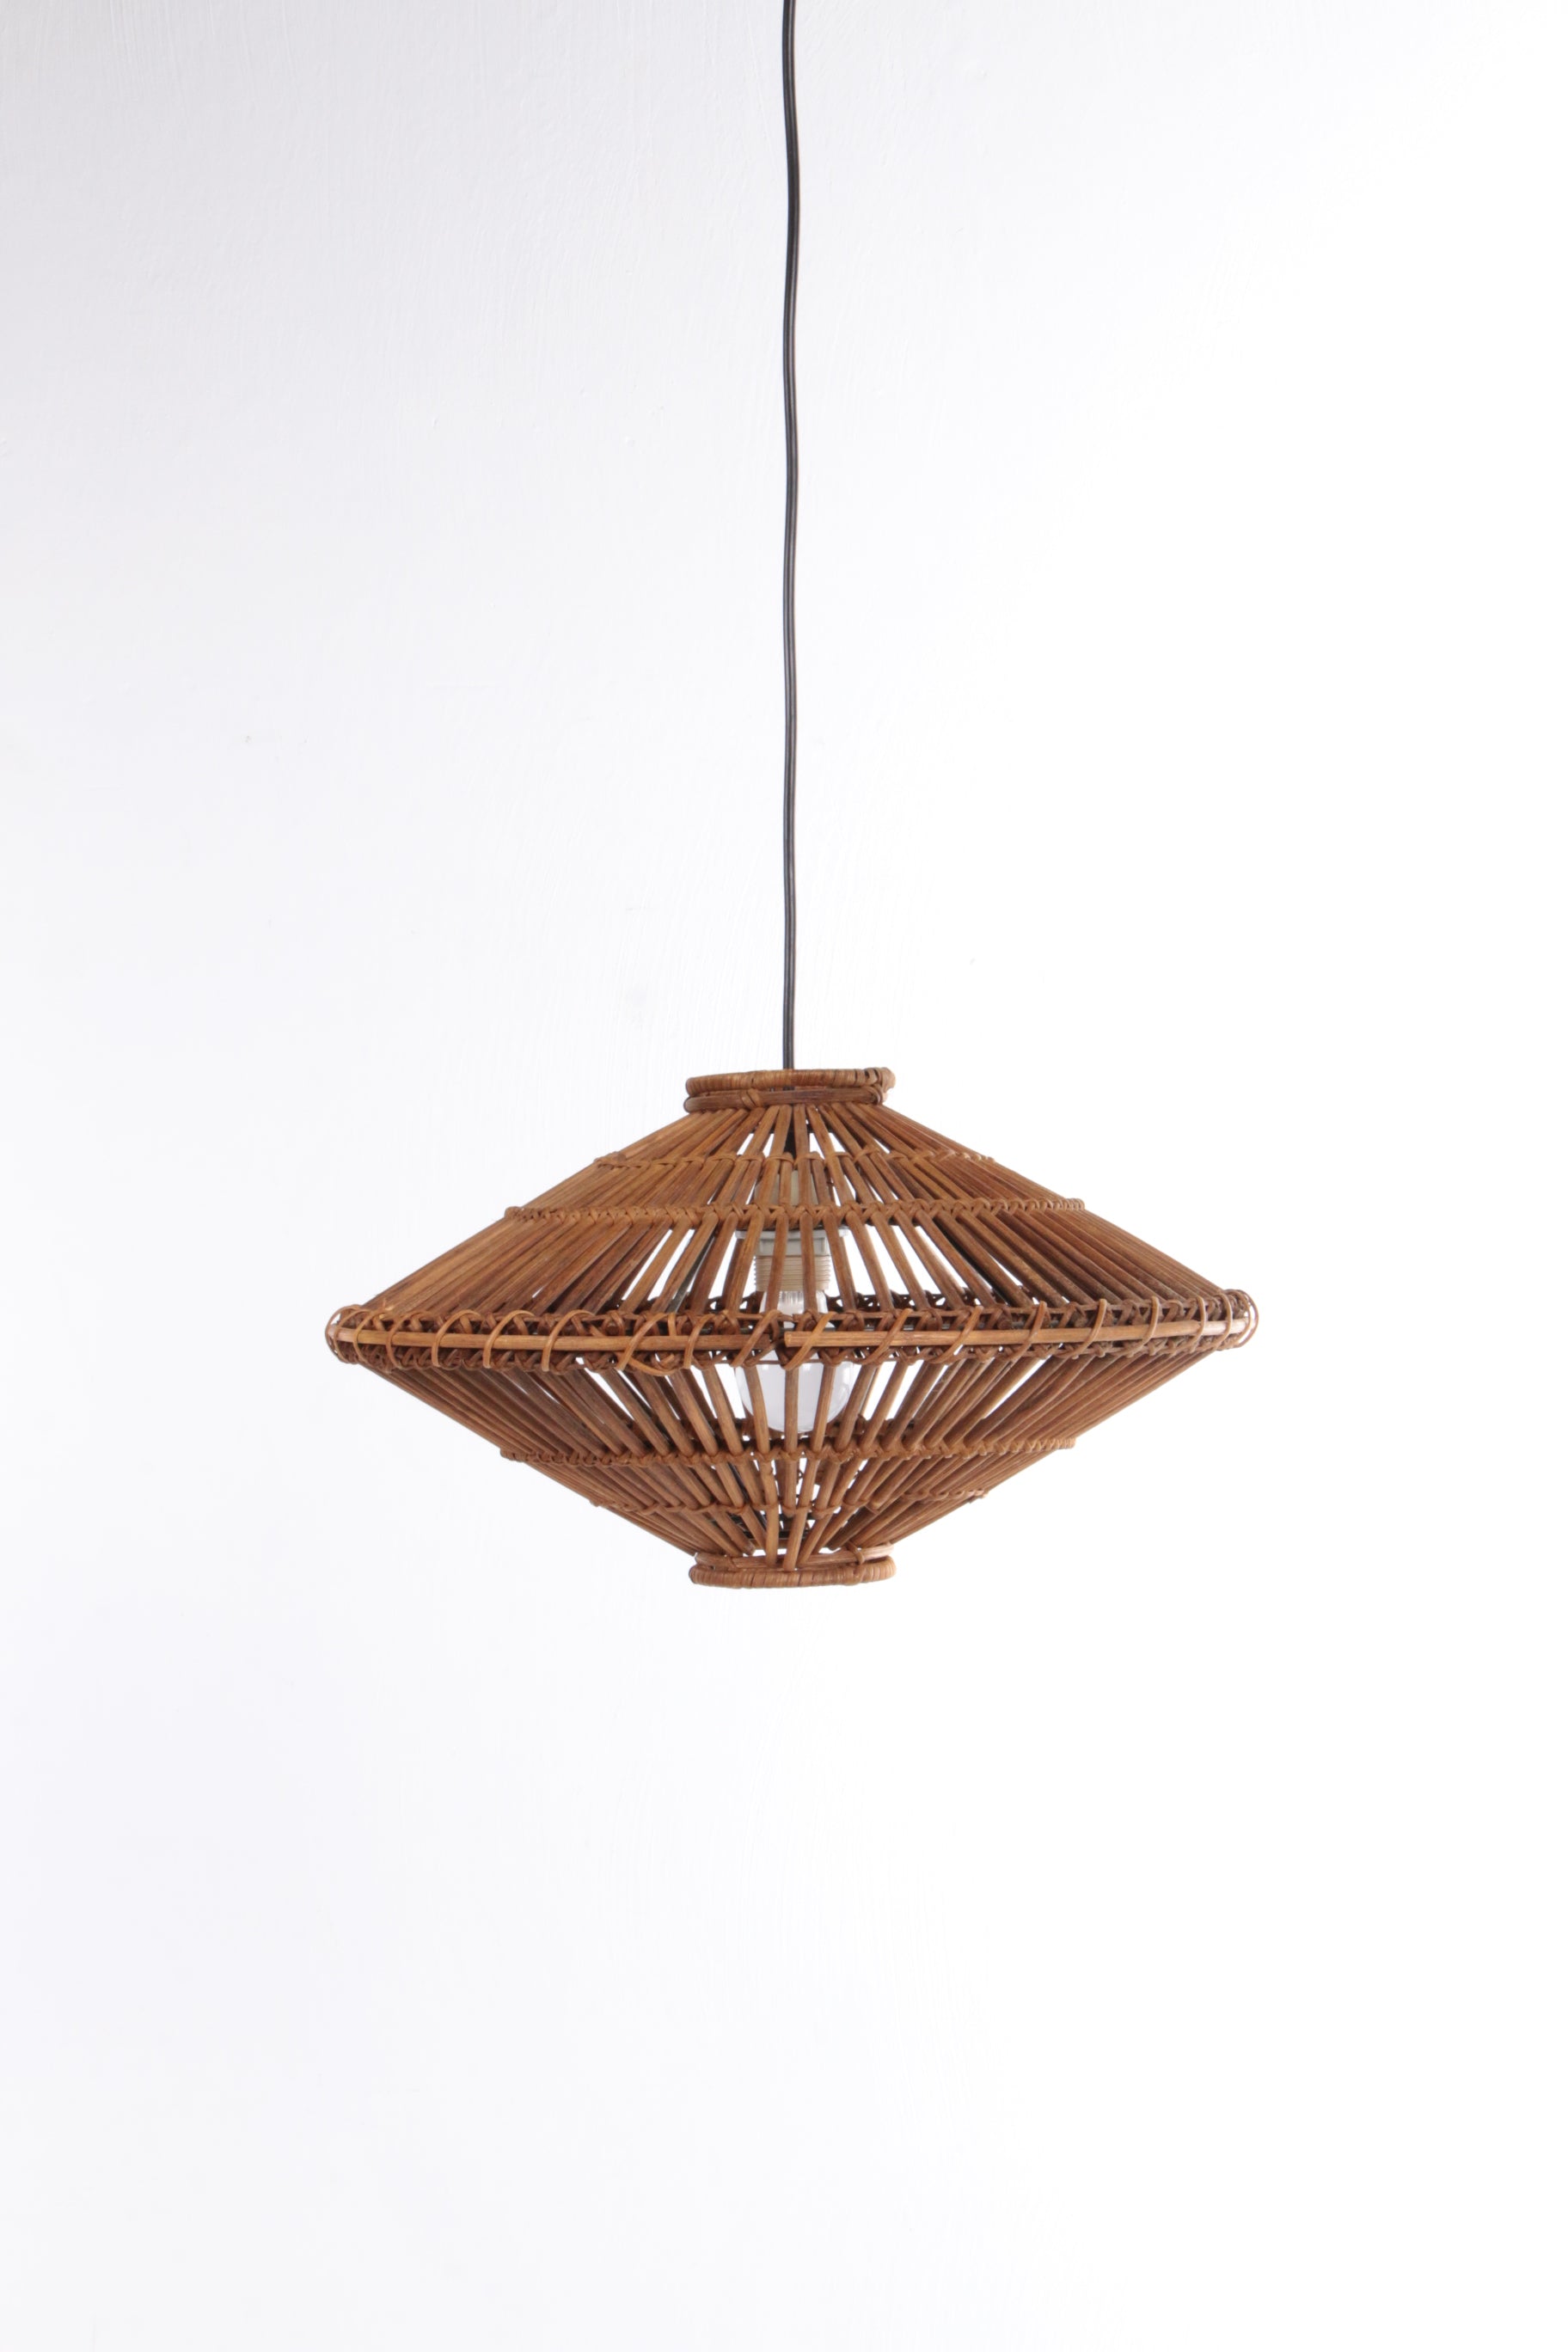 French 1960s pendant lamp made of bamboo.